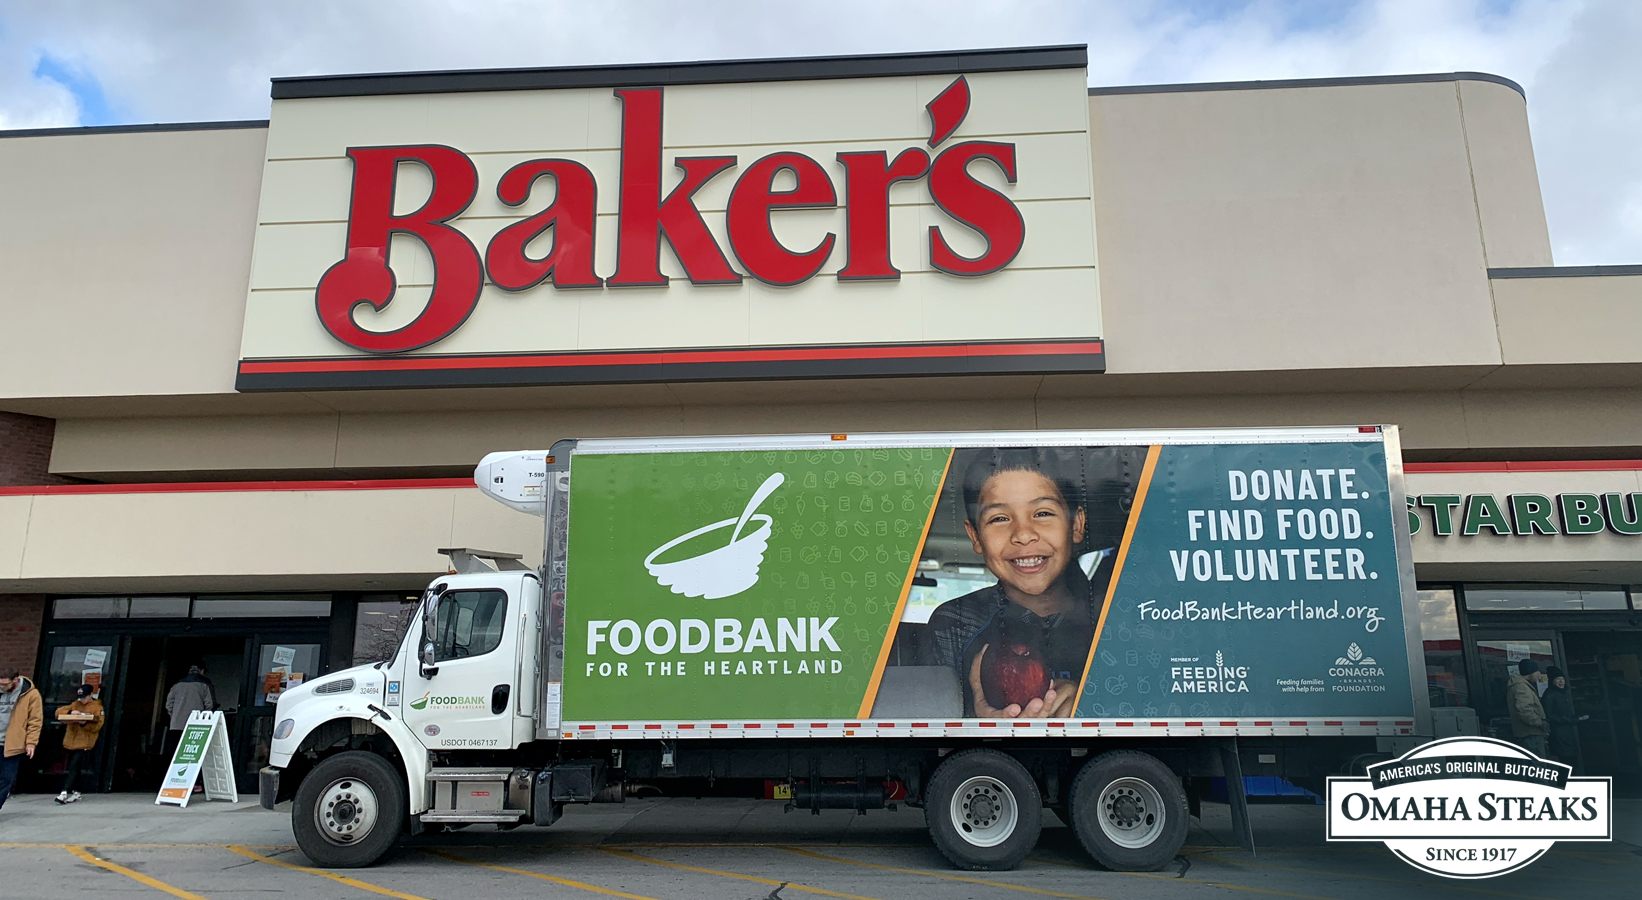 Photo of Food Bank for the Heartland straight truck in front of Baker's with Omaha Steaks logo